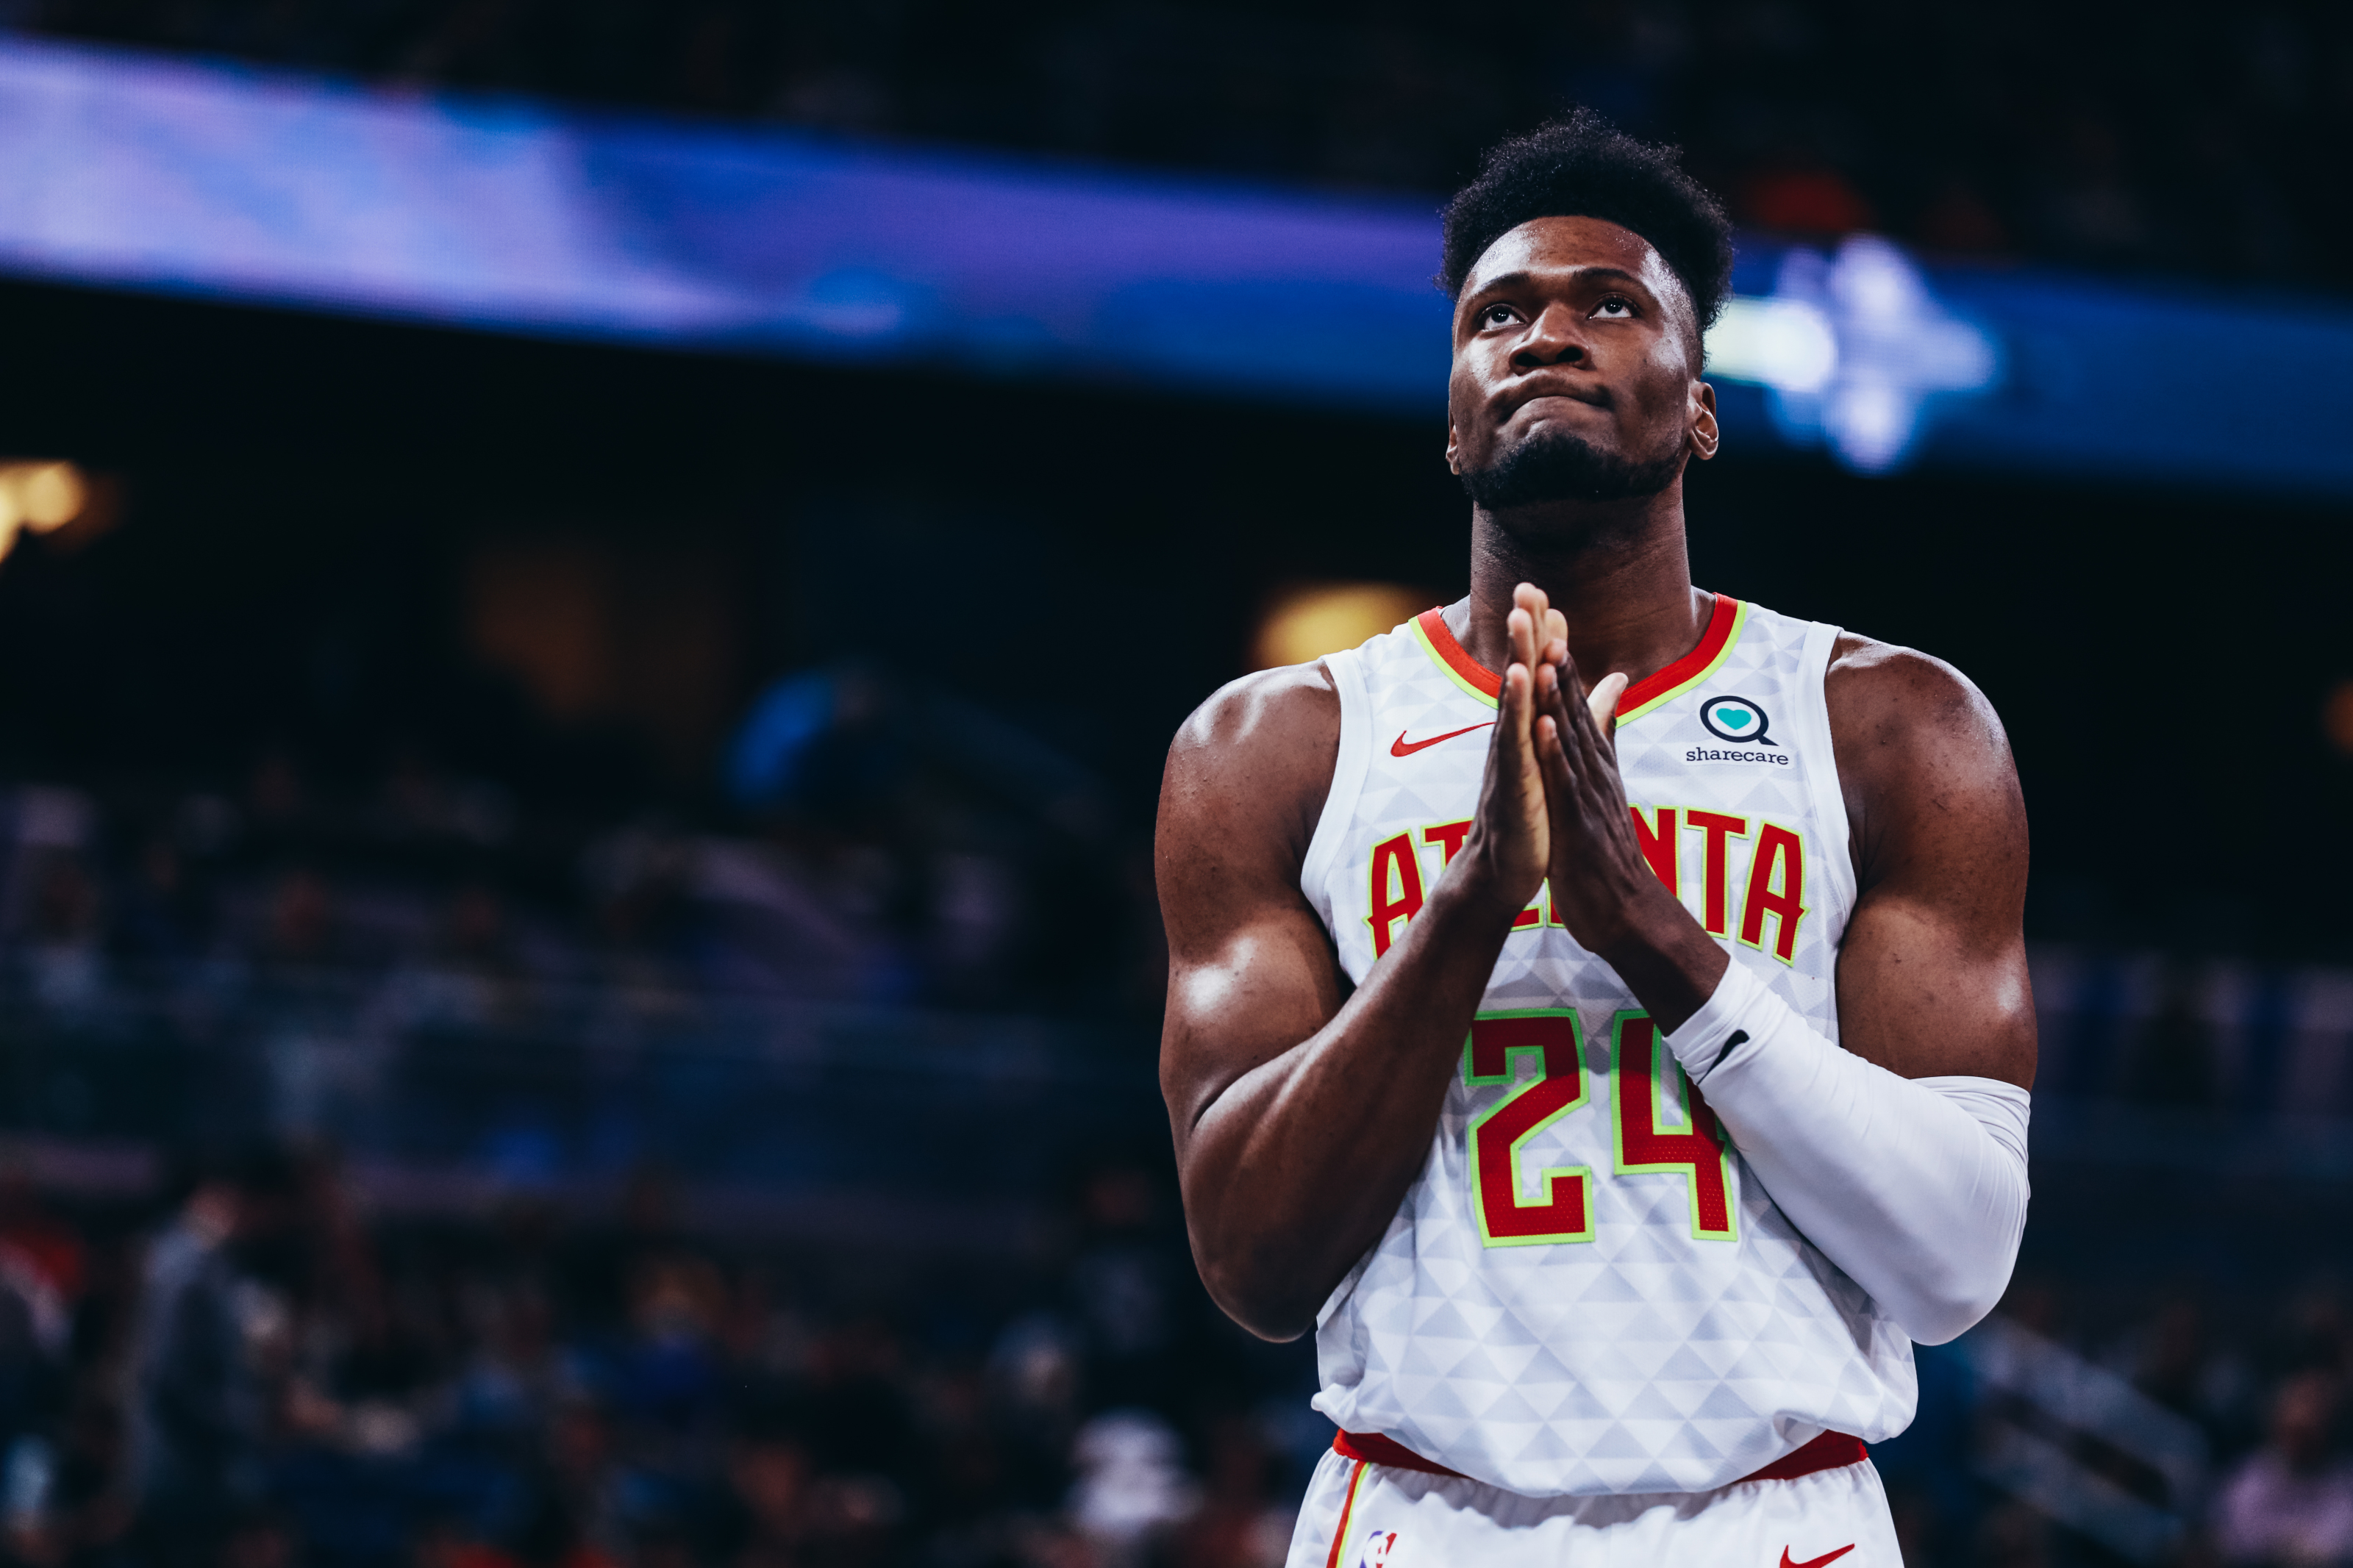 Bruno Fernando making history as first Angolan to play in the NBA